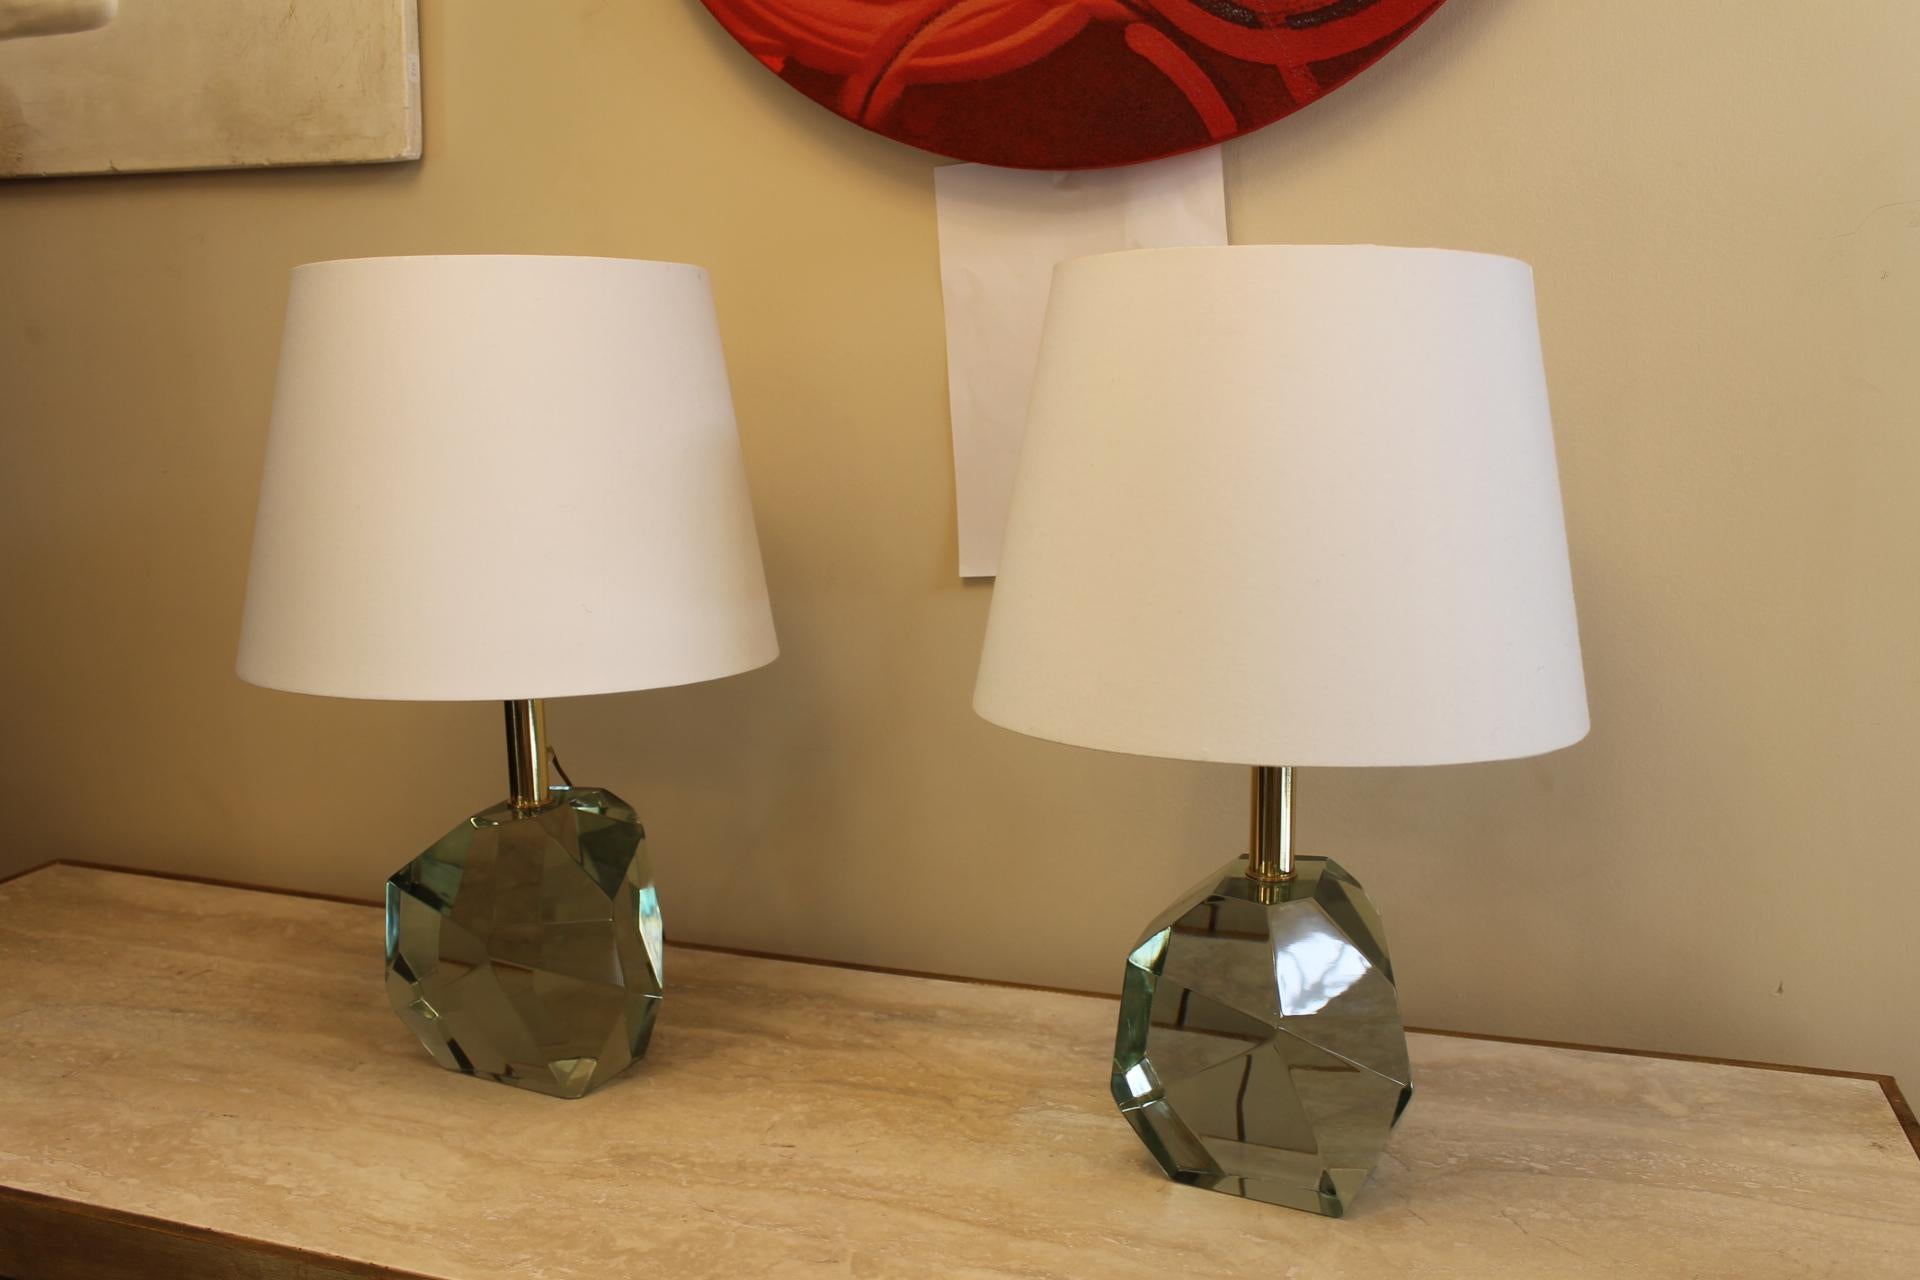 Pair of Murano glass lamps, emerald color, similar to pebbles. They are mounted in lamps with a white lampshade. An E 27 base bulb.
Pair of very elegant lamps.The originality is the glass which is cut like a pebble.
Translucent glass
They are